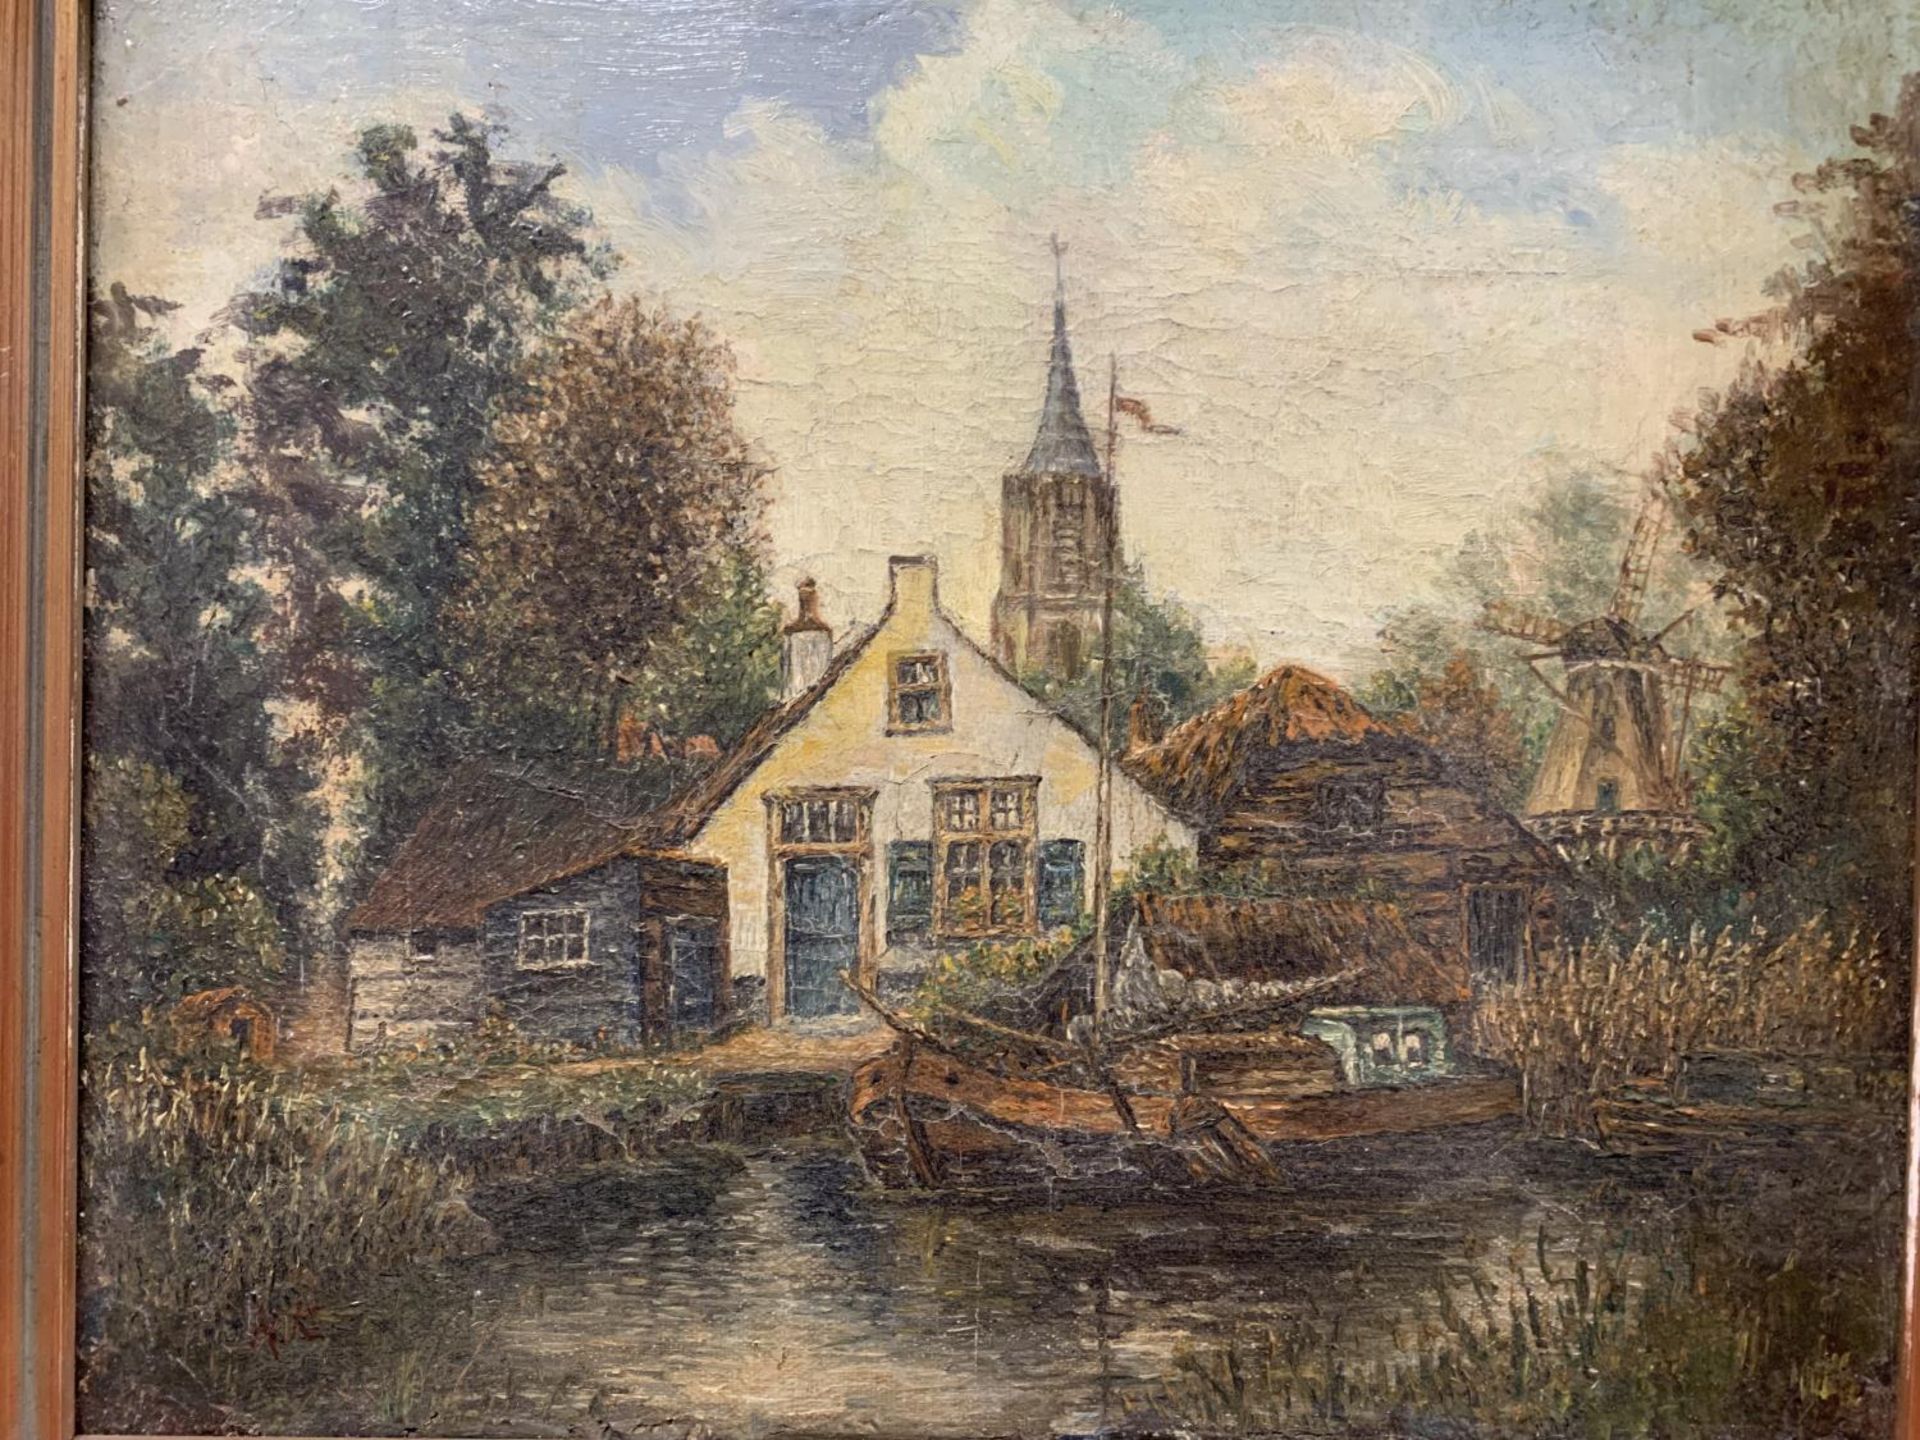 AN OLD OIL ON CANVAS PAINTING OF A DUTCH STYLE CANAL SCENE WITH BARGES AND A WINDMILL SIGNED HK - Image 2 of 2